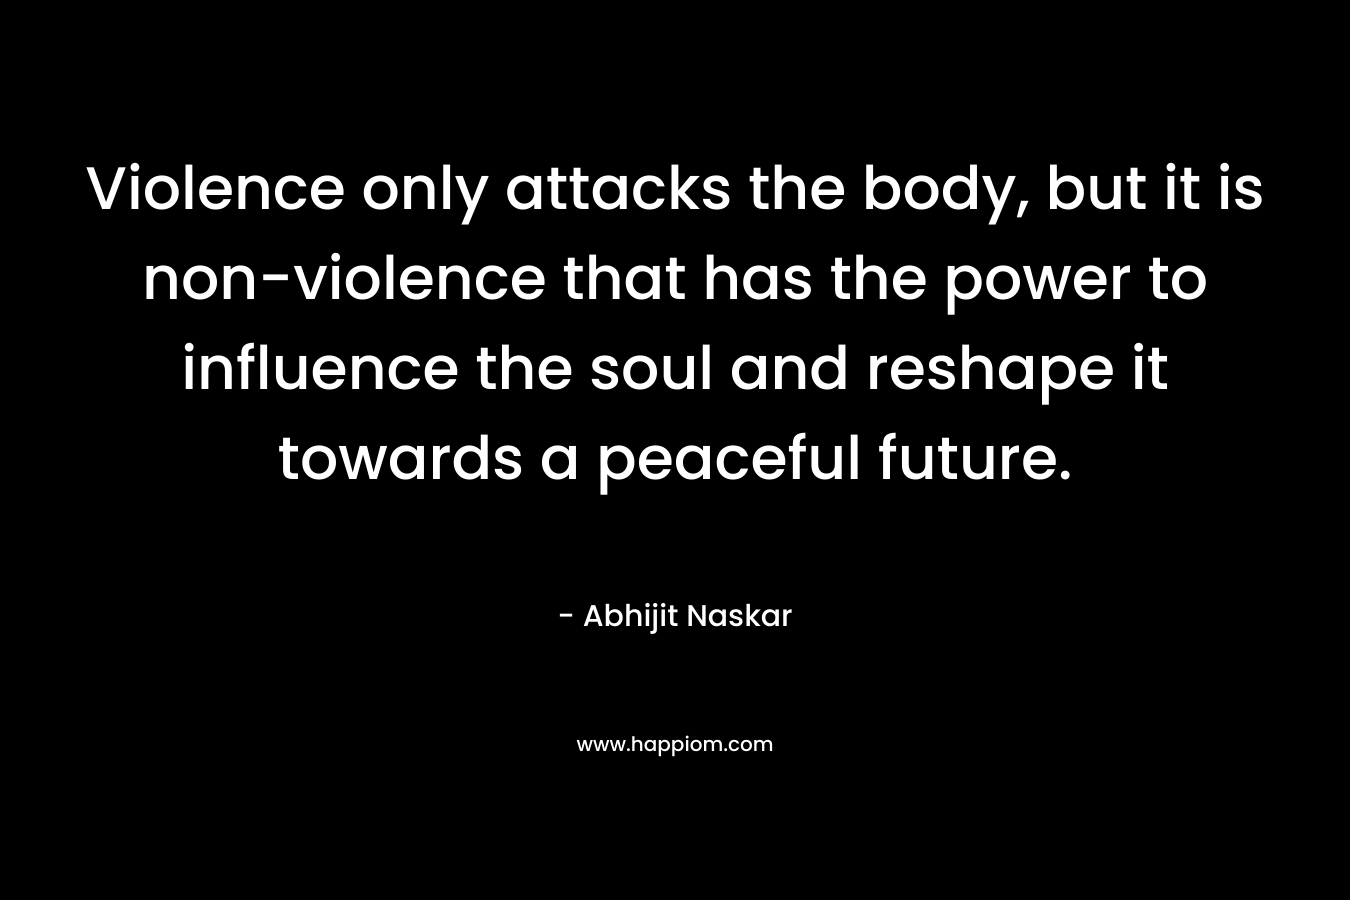 Violence only attacks the body, but it is non-violence that has the power to influence the soul and reshape it towards a peaceful future.